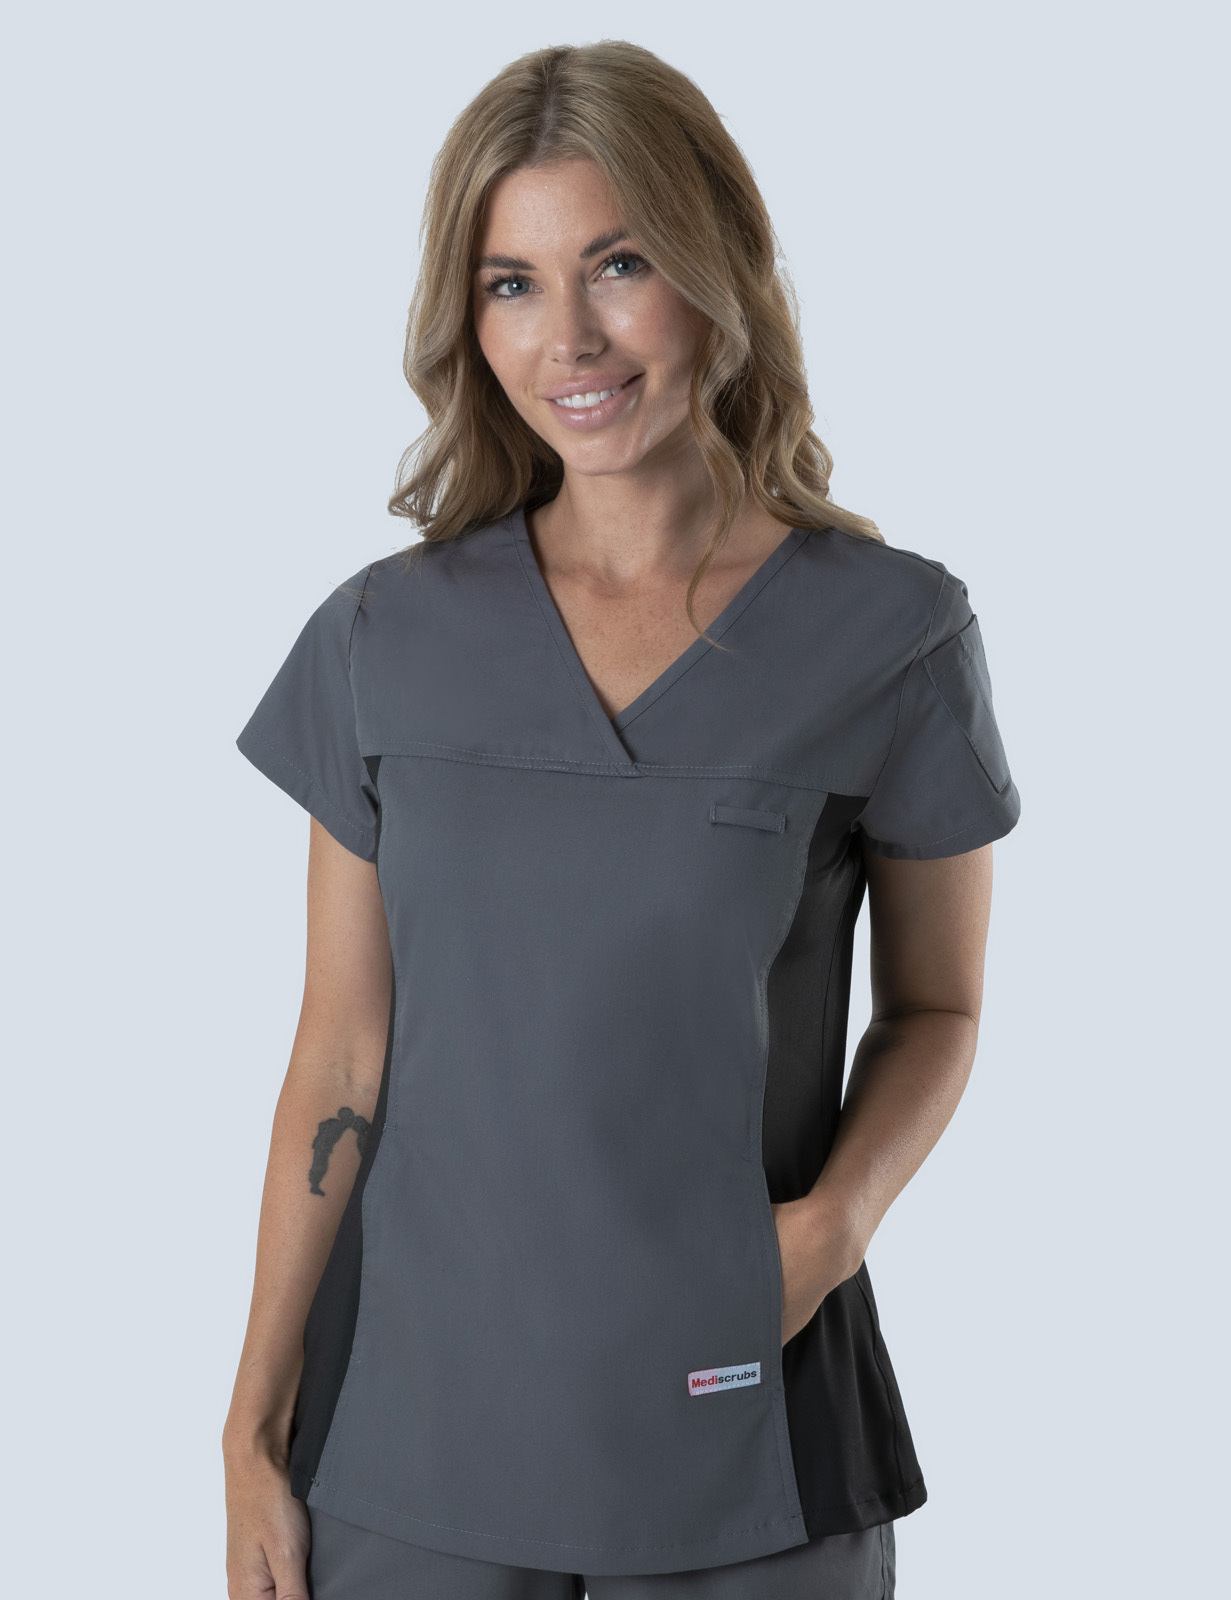 Women's Fit Solid Scrub Top With Spandex Panel - Steel Grey - 5X Large